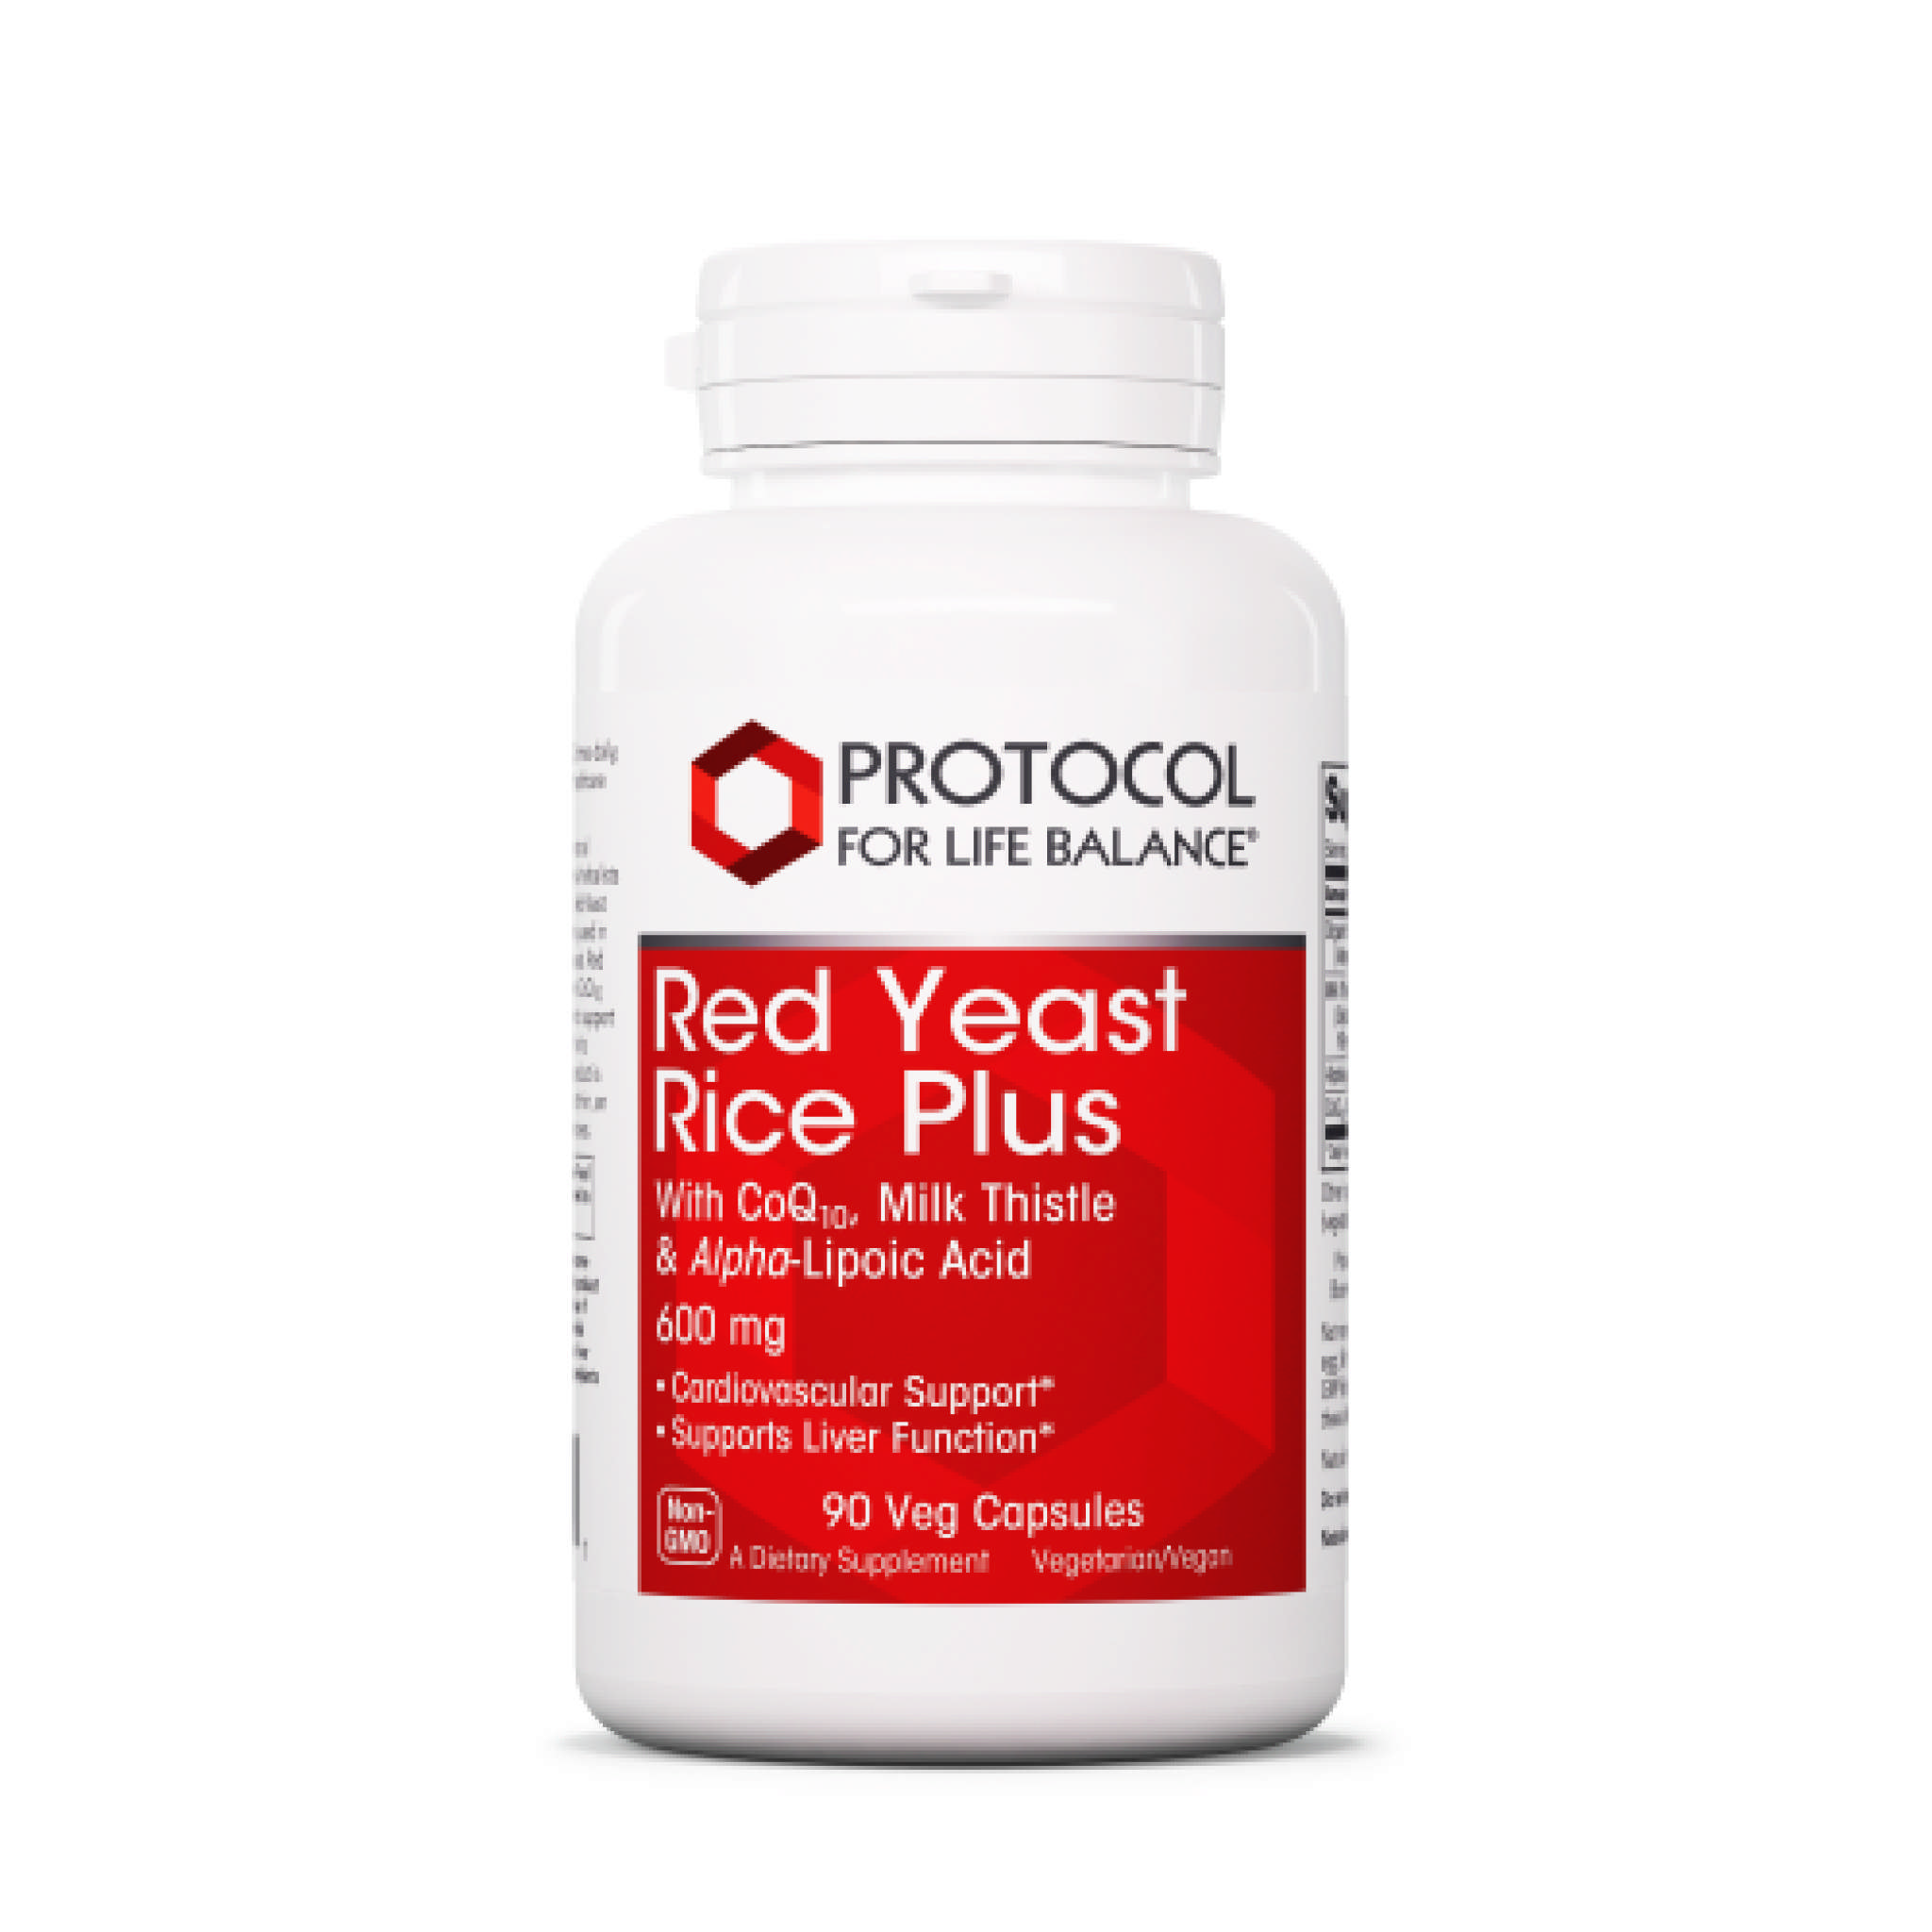 Protocol For Life Balance - Red Yeast Rice Plus Coq10 vCap